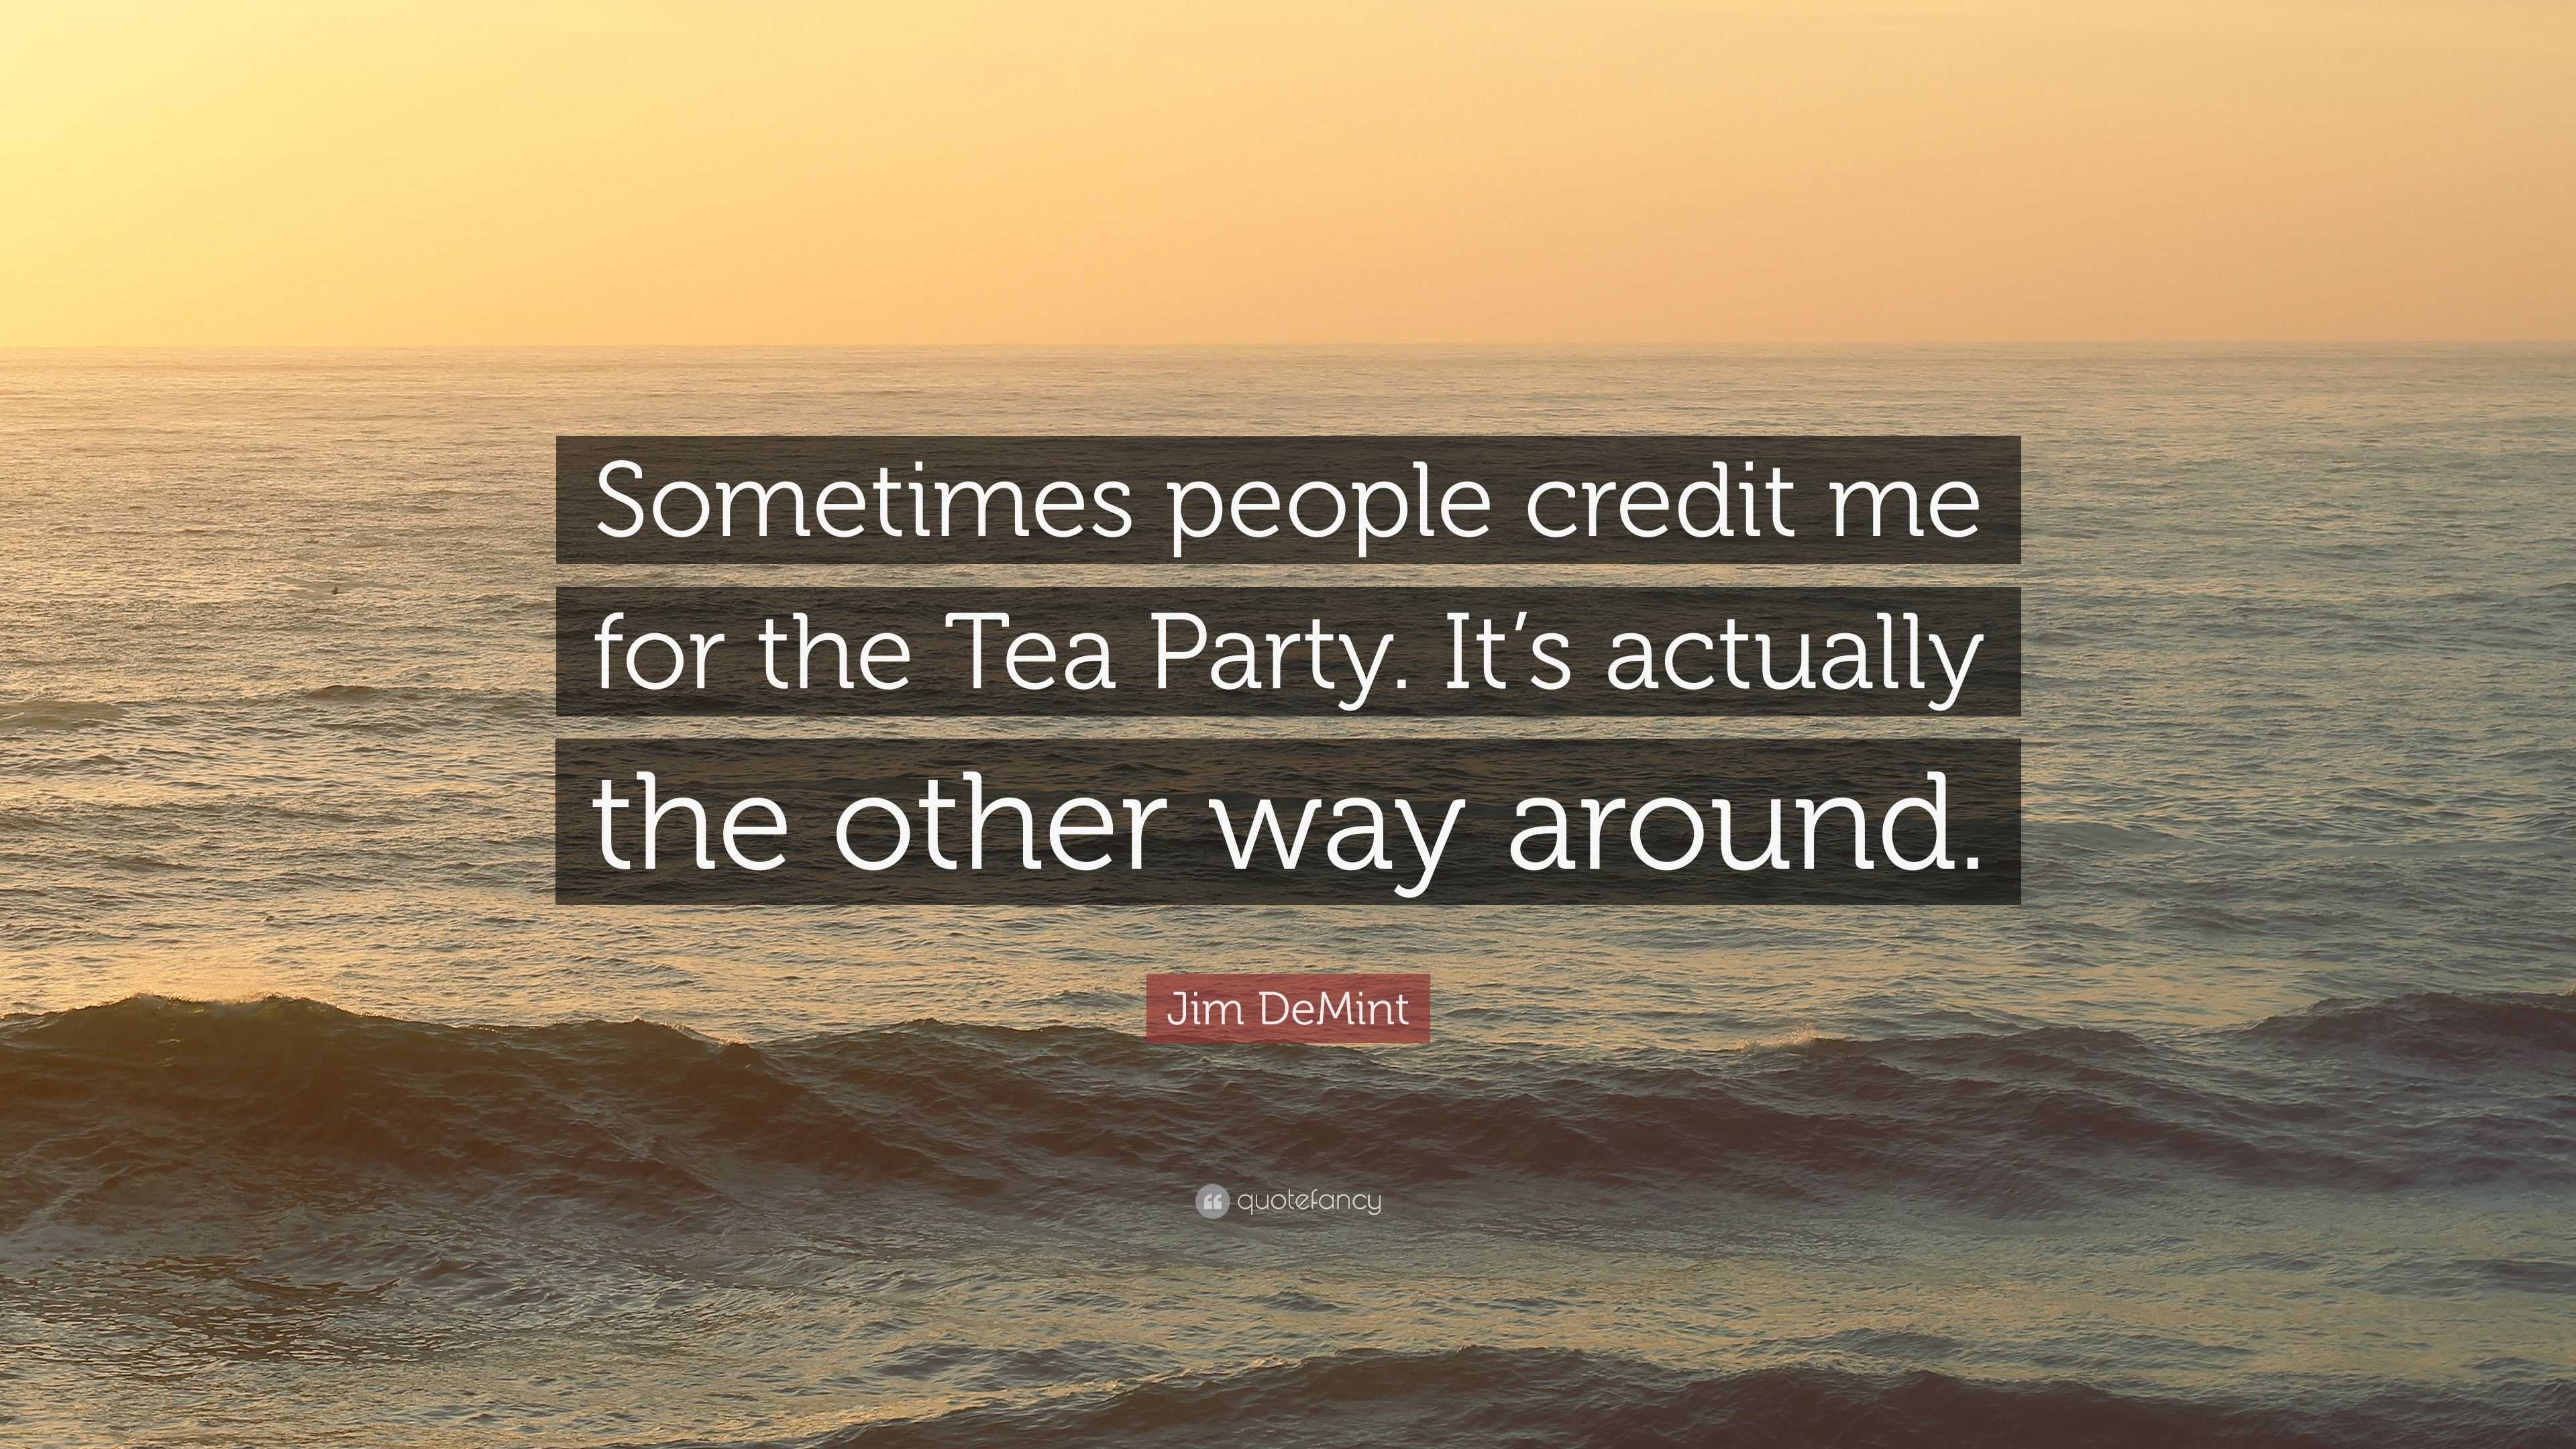 Jim Demint Quote “sometimes People Credit Me For The Tea Party Its Actually The Other Way 1423